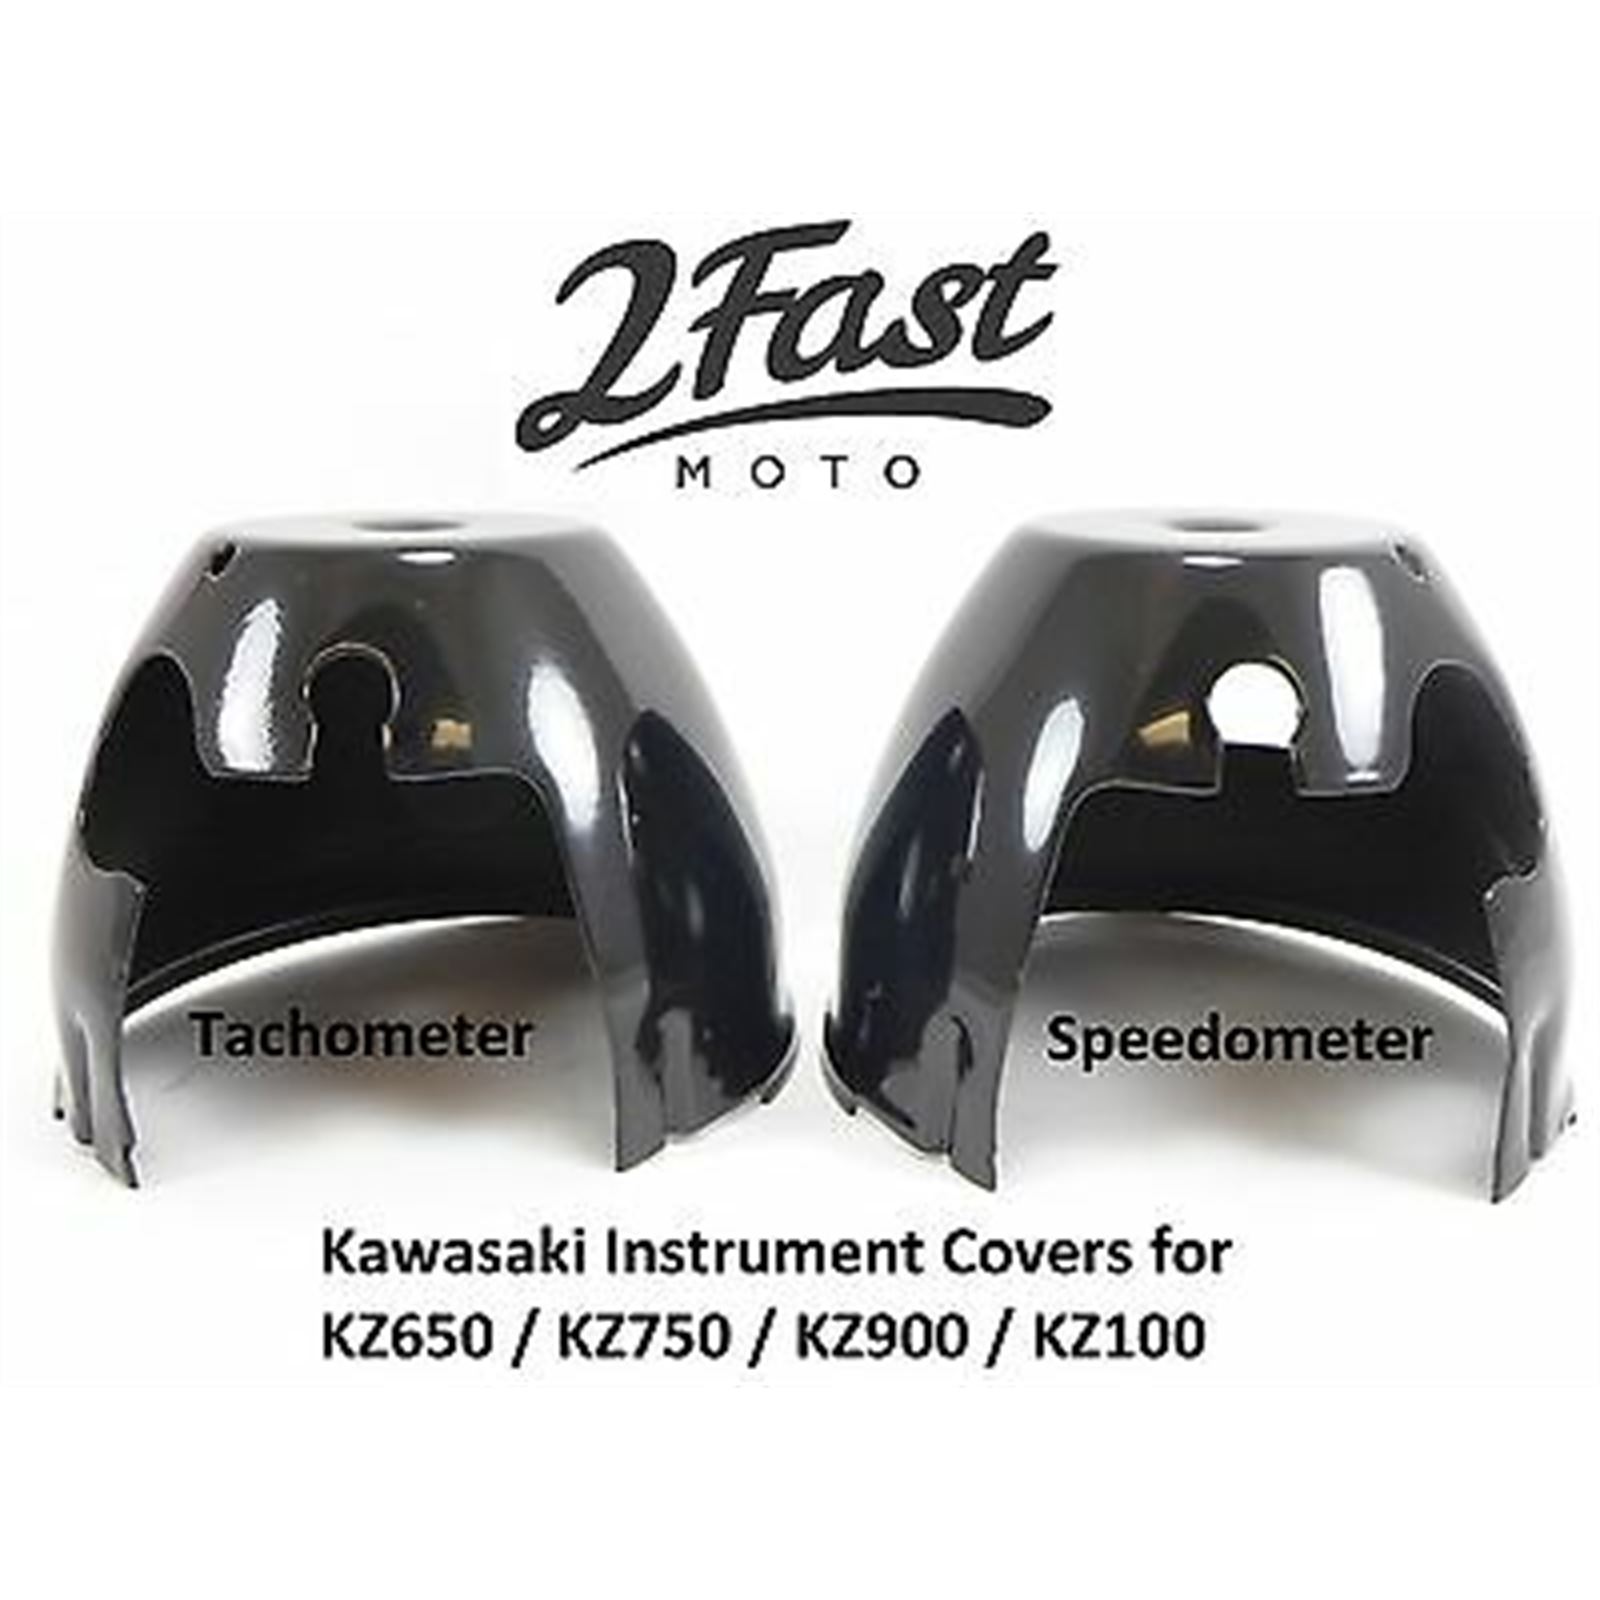 2FastMoto Speedometer/Tachometer Instrument Lower Base Cover Black - Kawasaki KZ 750, 900 Z1 - Motorcycle, ATV / UTV & Powersports Parts | The Best Motorcycle, ATV & Snow Gear, Accessories and More